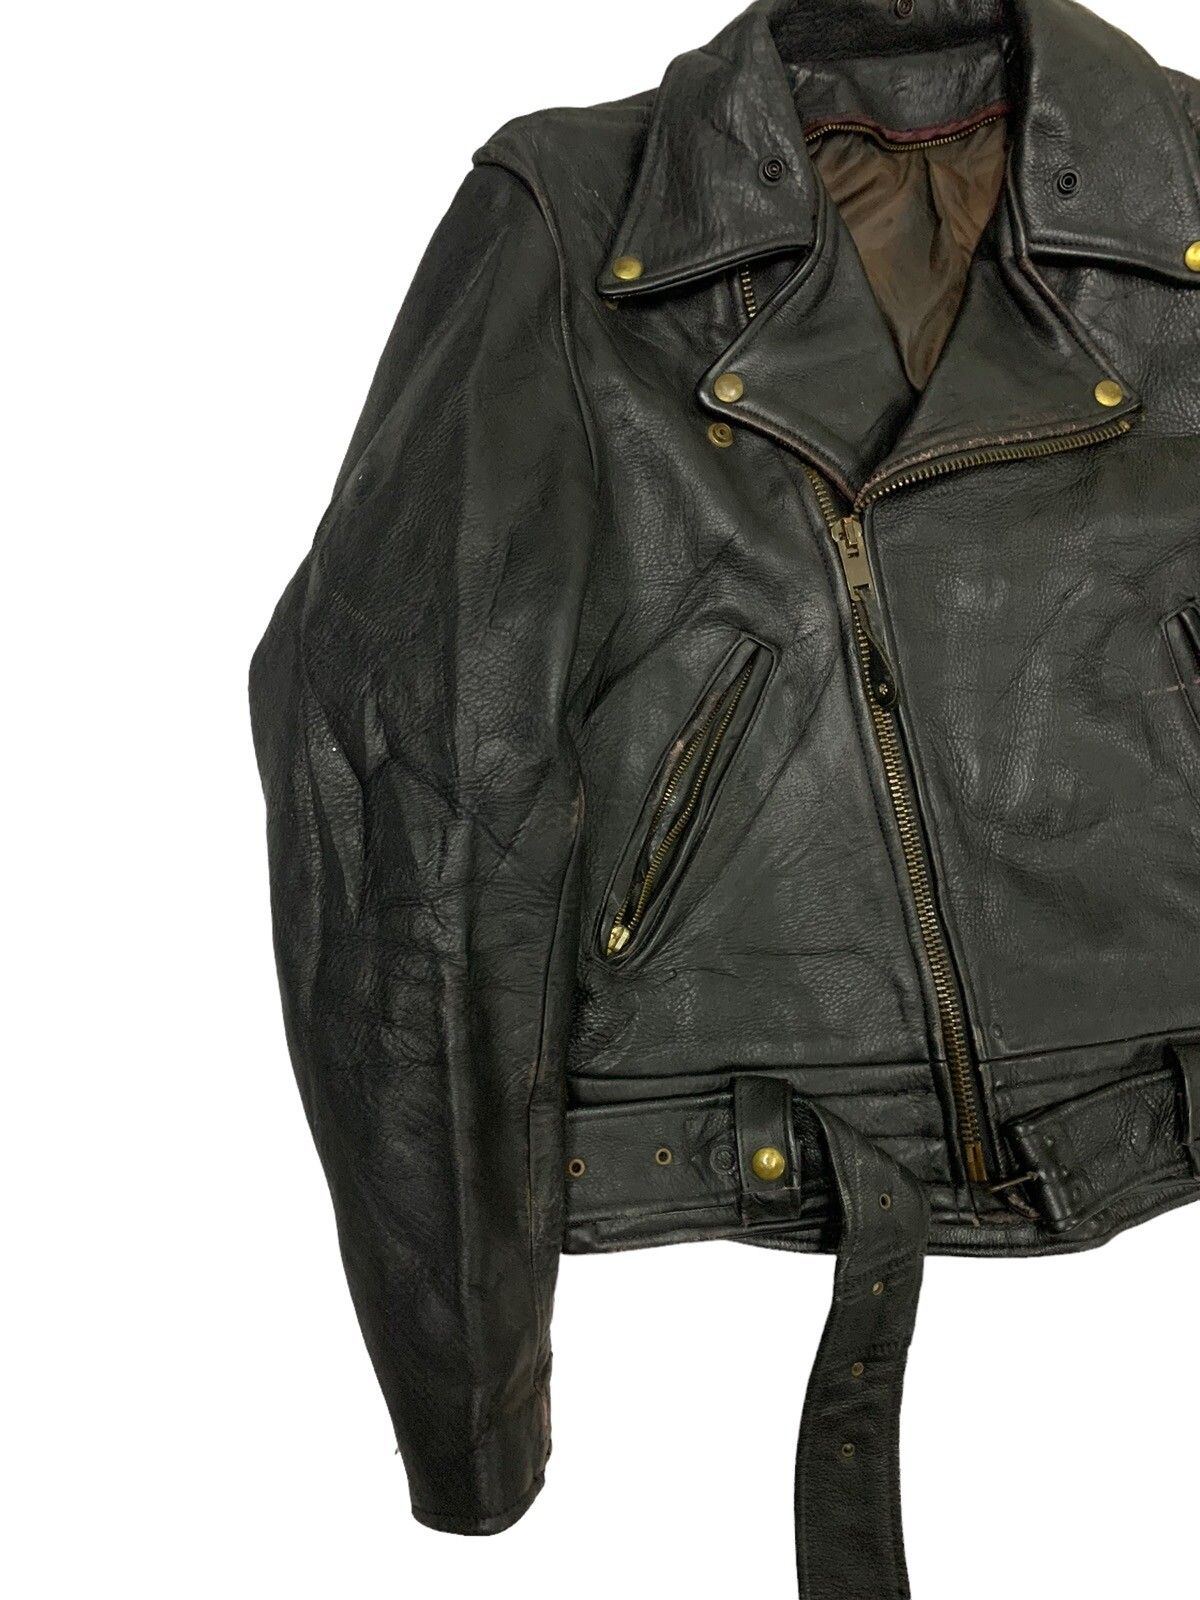 🔥RARE VTG BIKERS LEATHER JACKETS DOUBLE COLLAR - 2